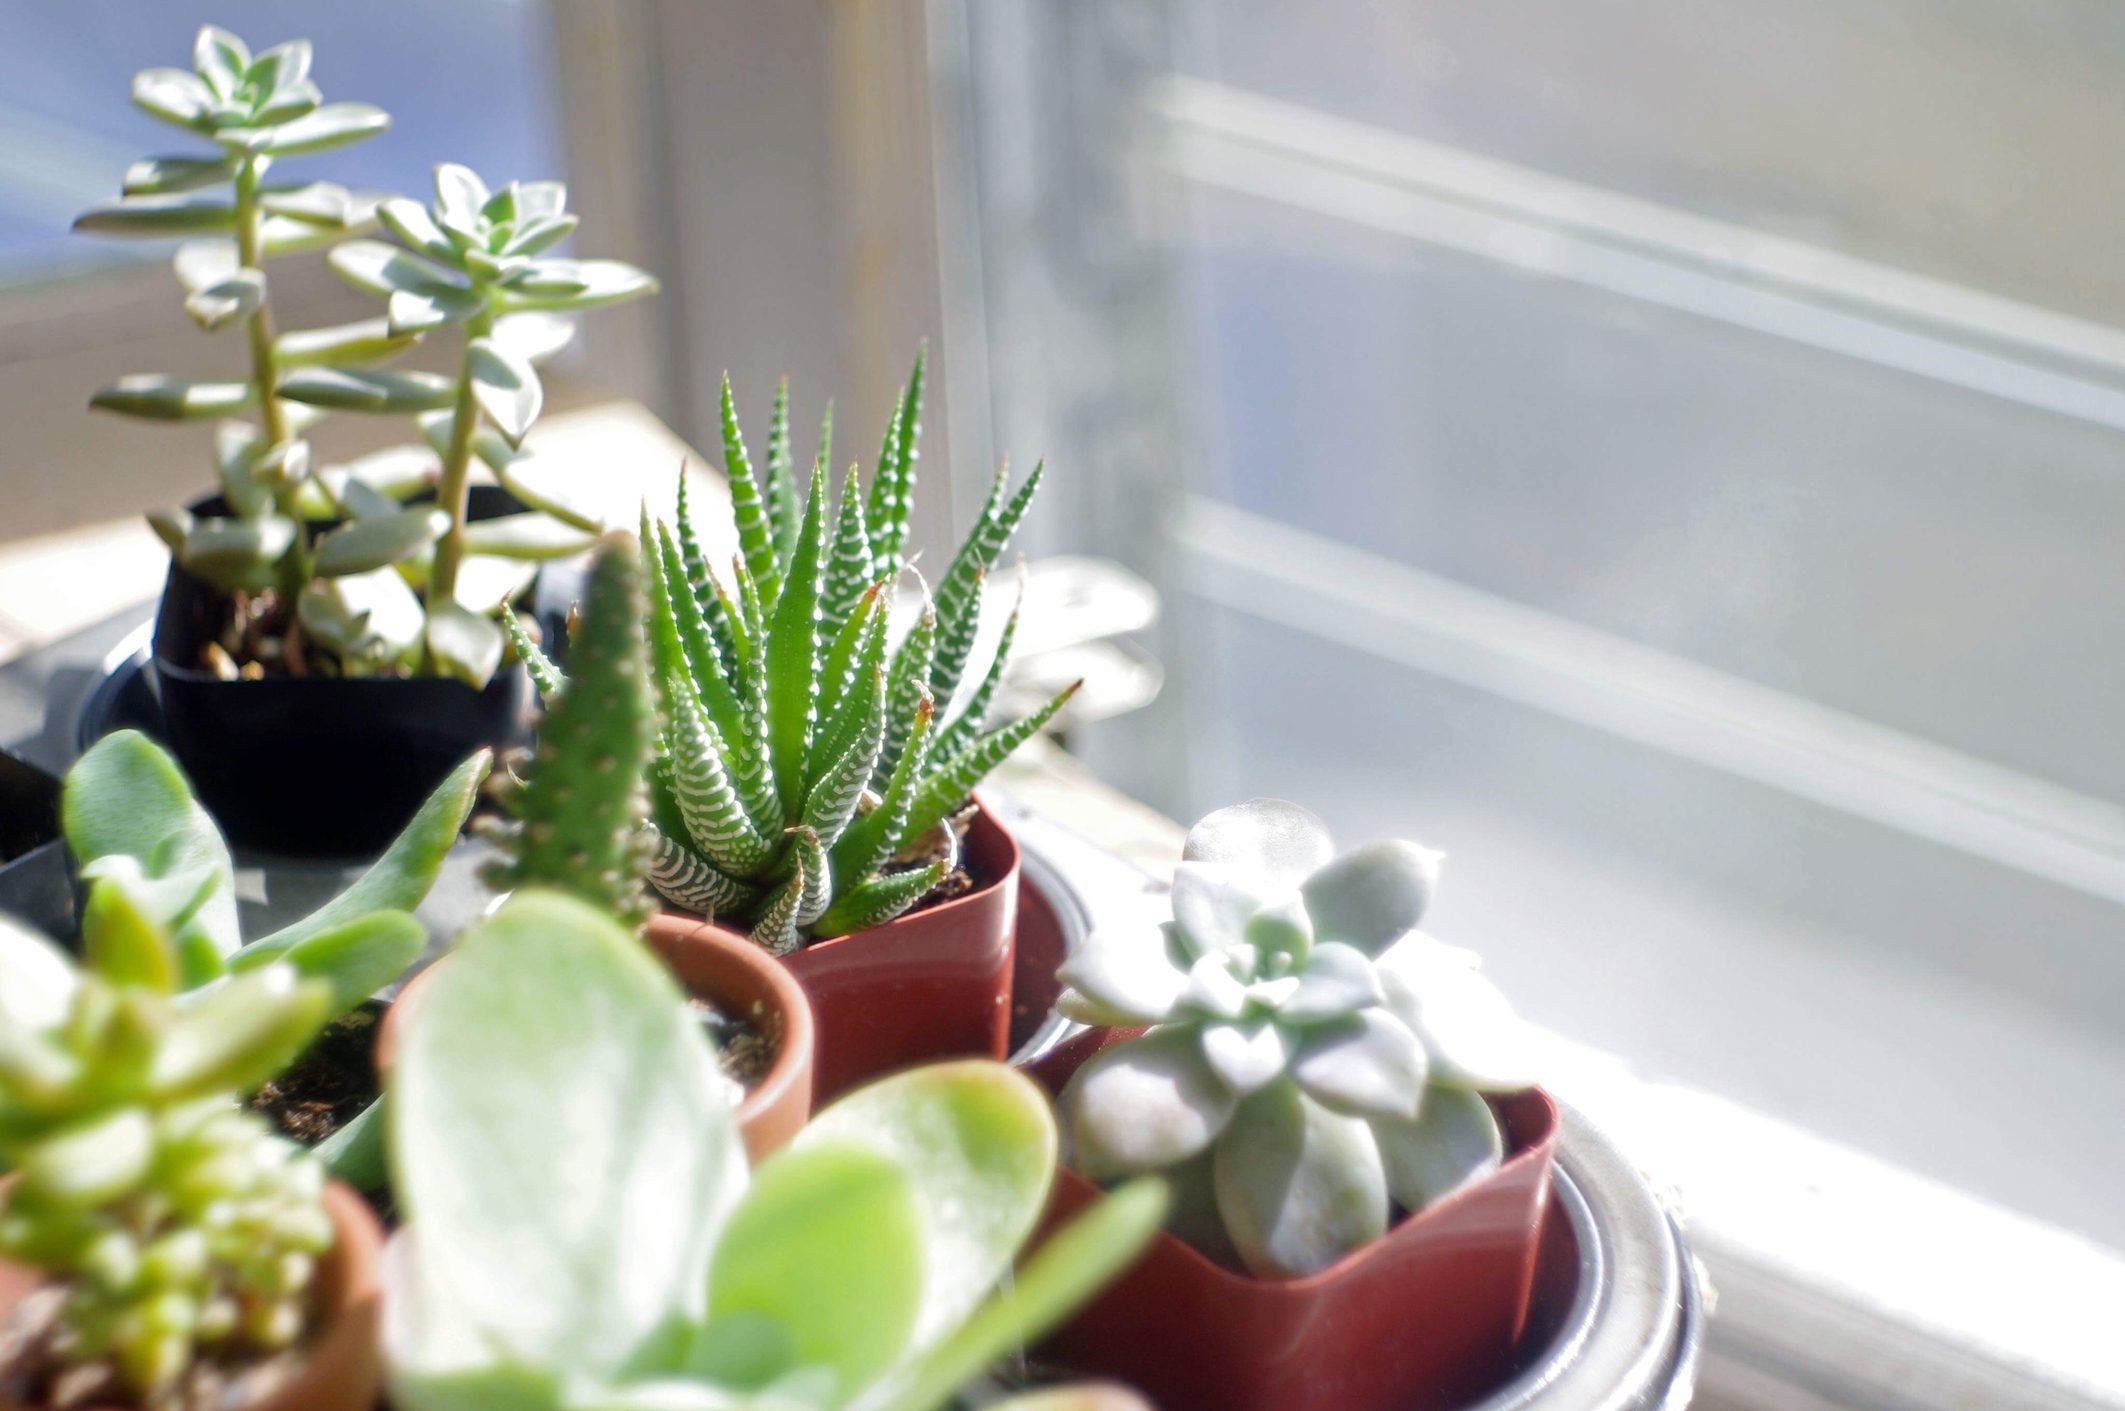  How to Take Care of Succulents, Inside or Outdoors